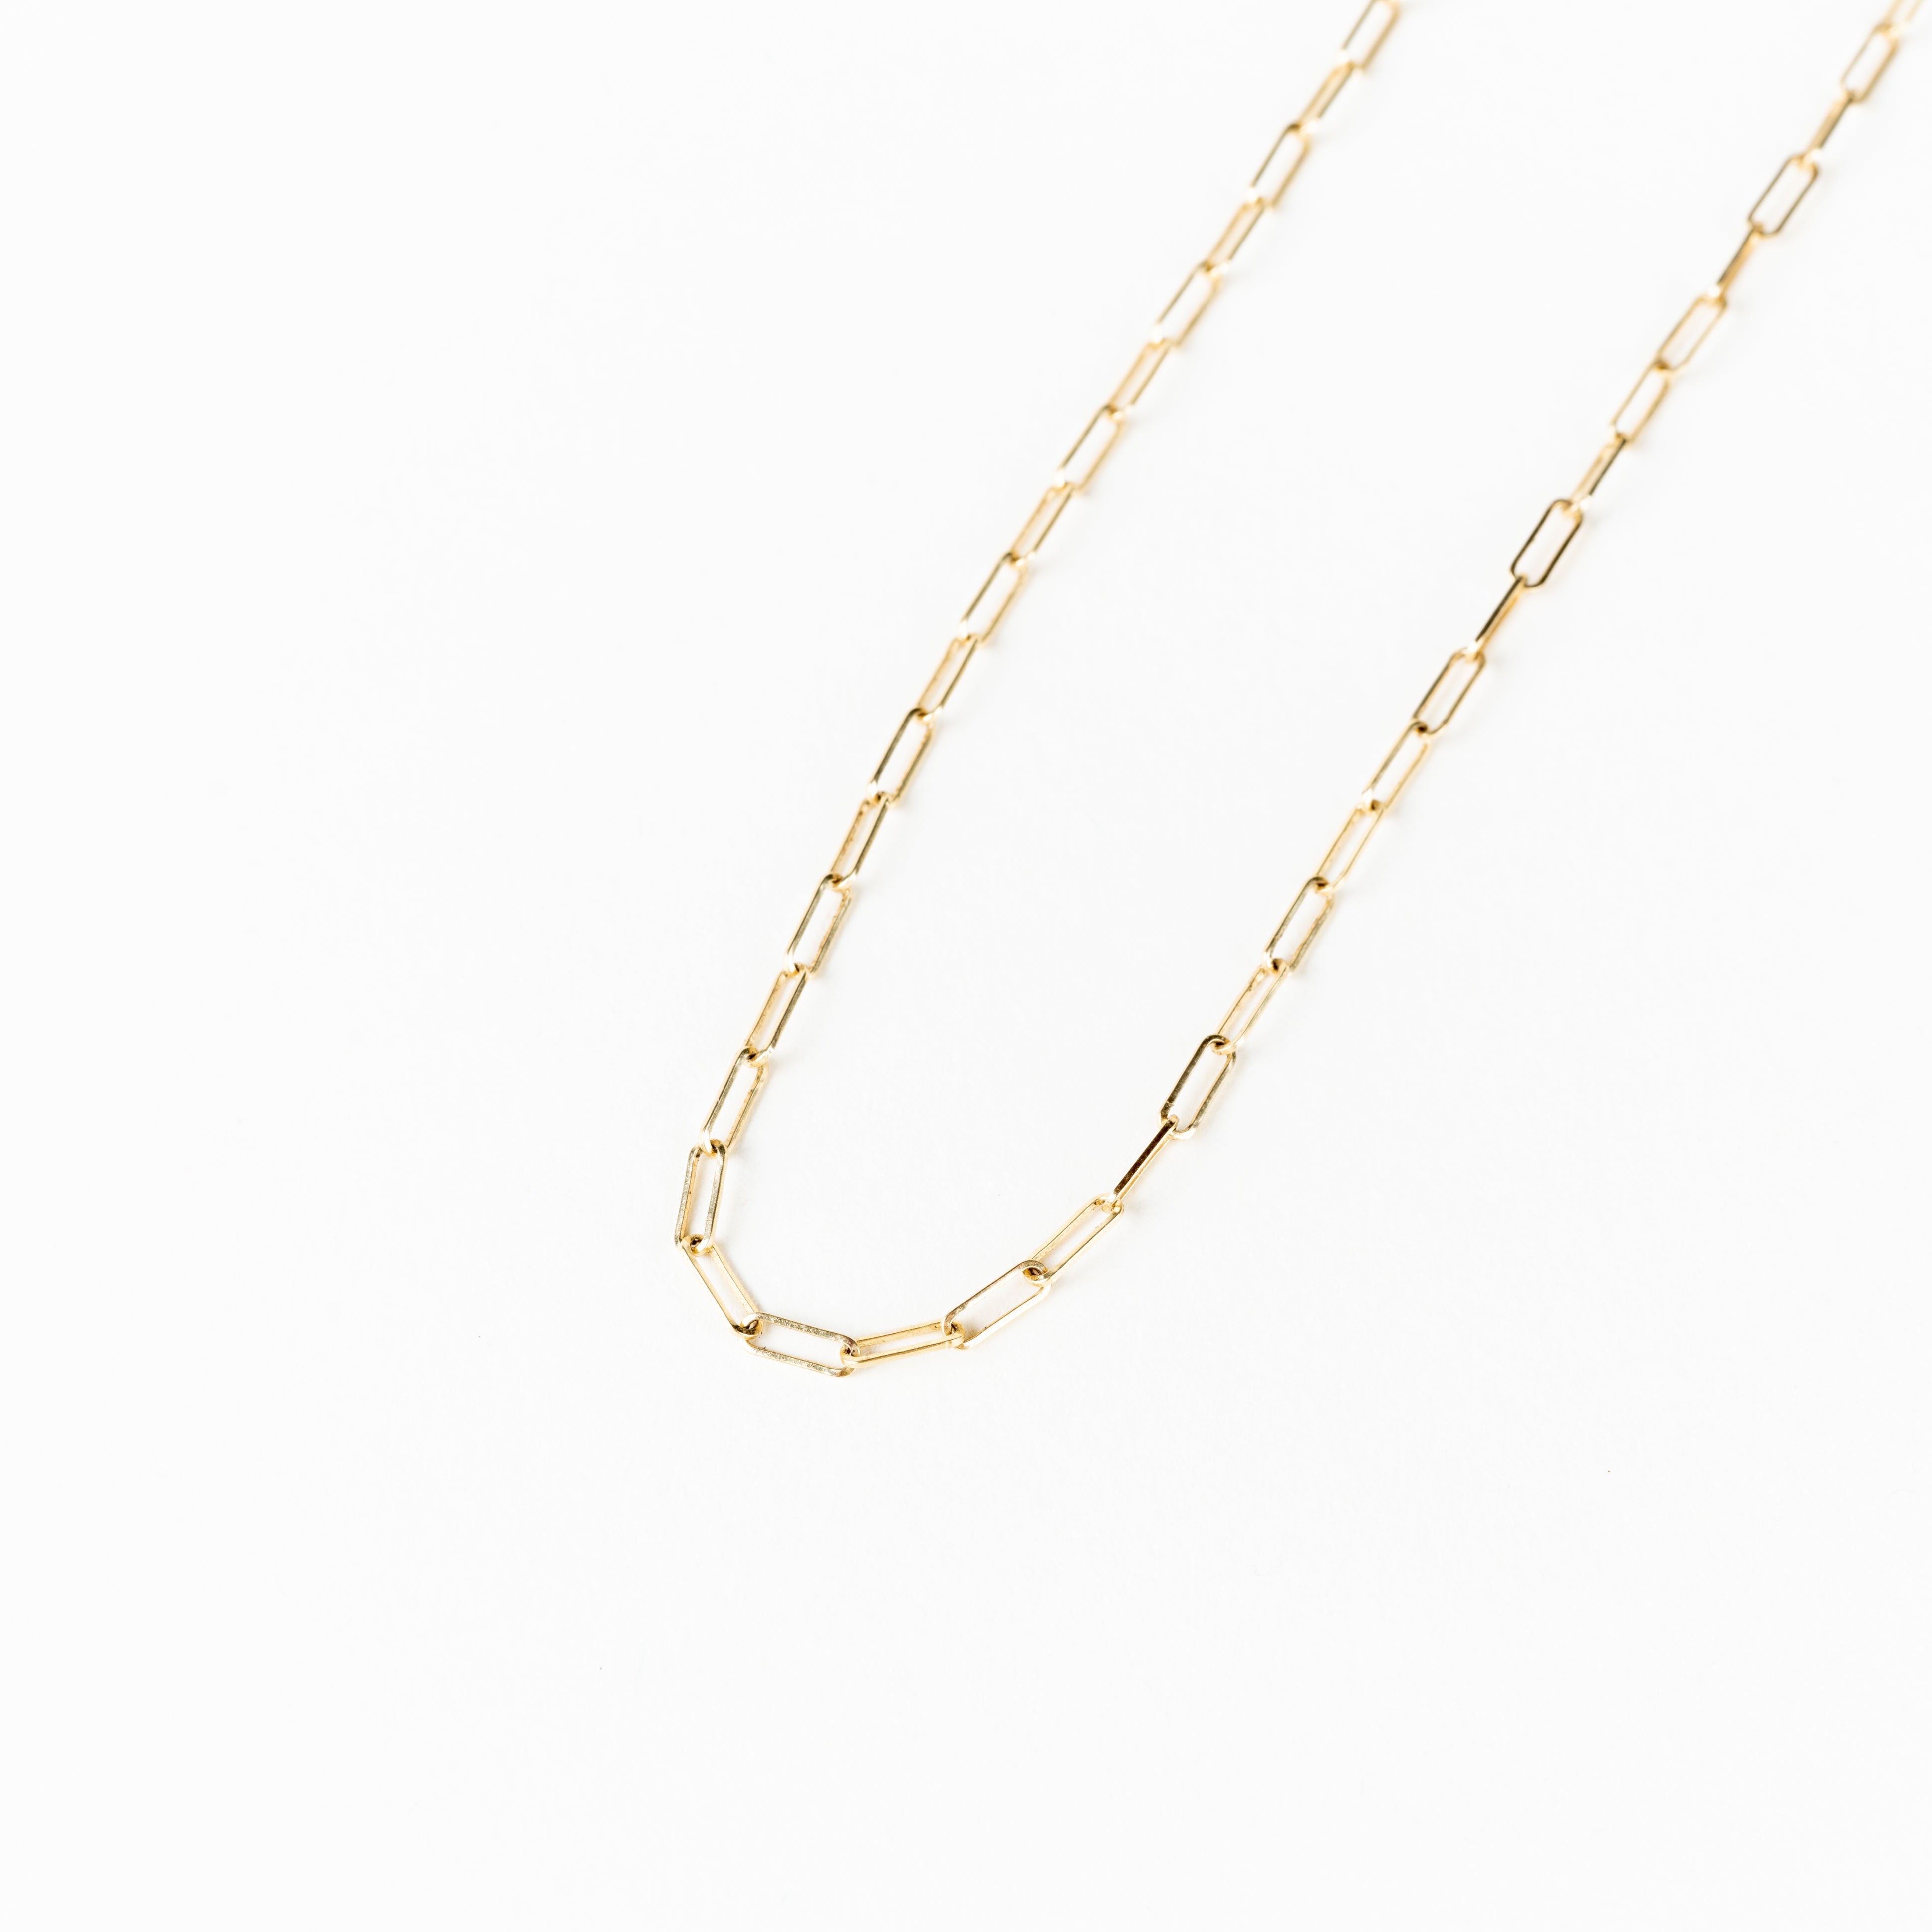 Eclipse Gold Chain in Gold Fill or Solid Gold